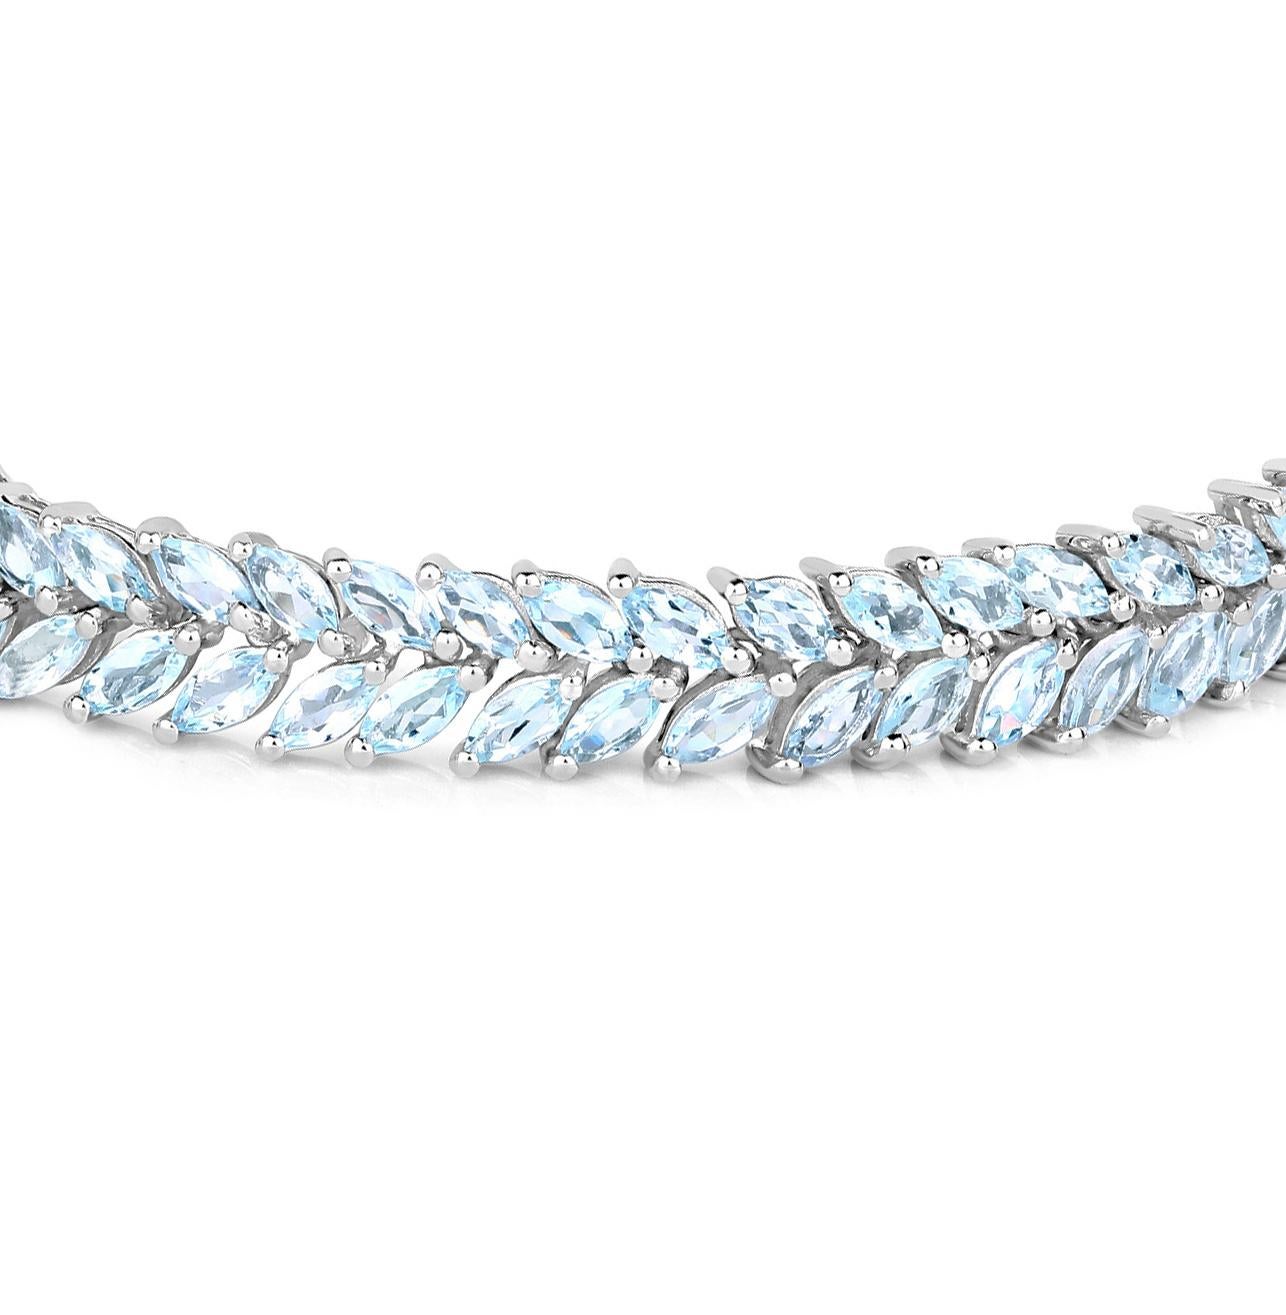 Marquise Cut Aquamarine Bracelet 10.12 Carats Sterling Silver In New Condition For Sale In Laguna Niguel, CA